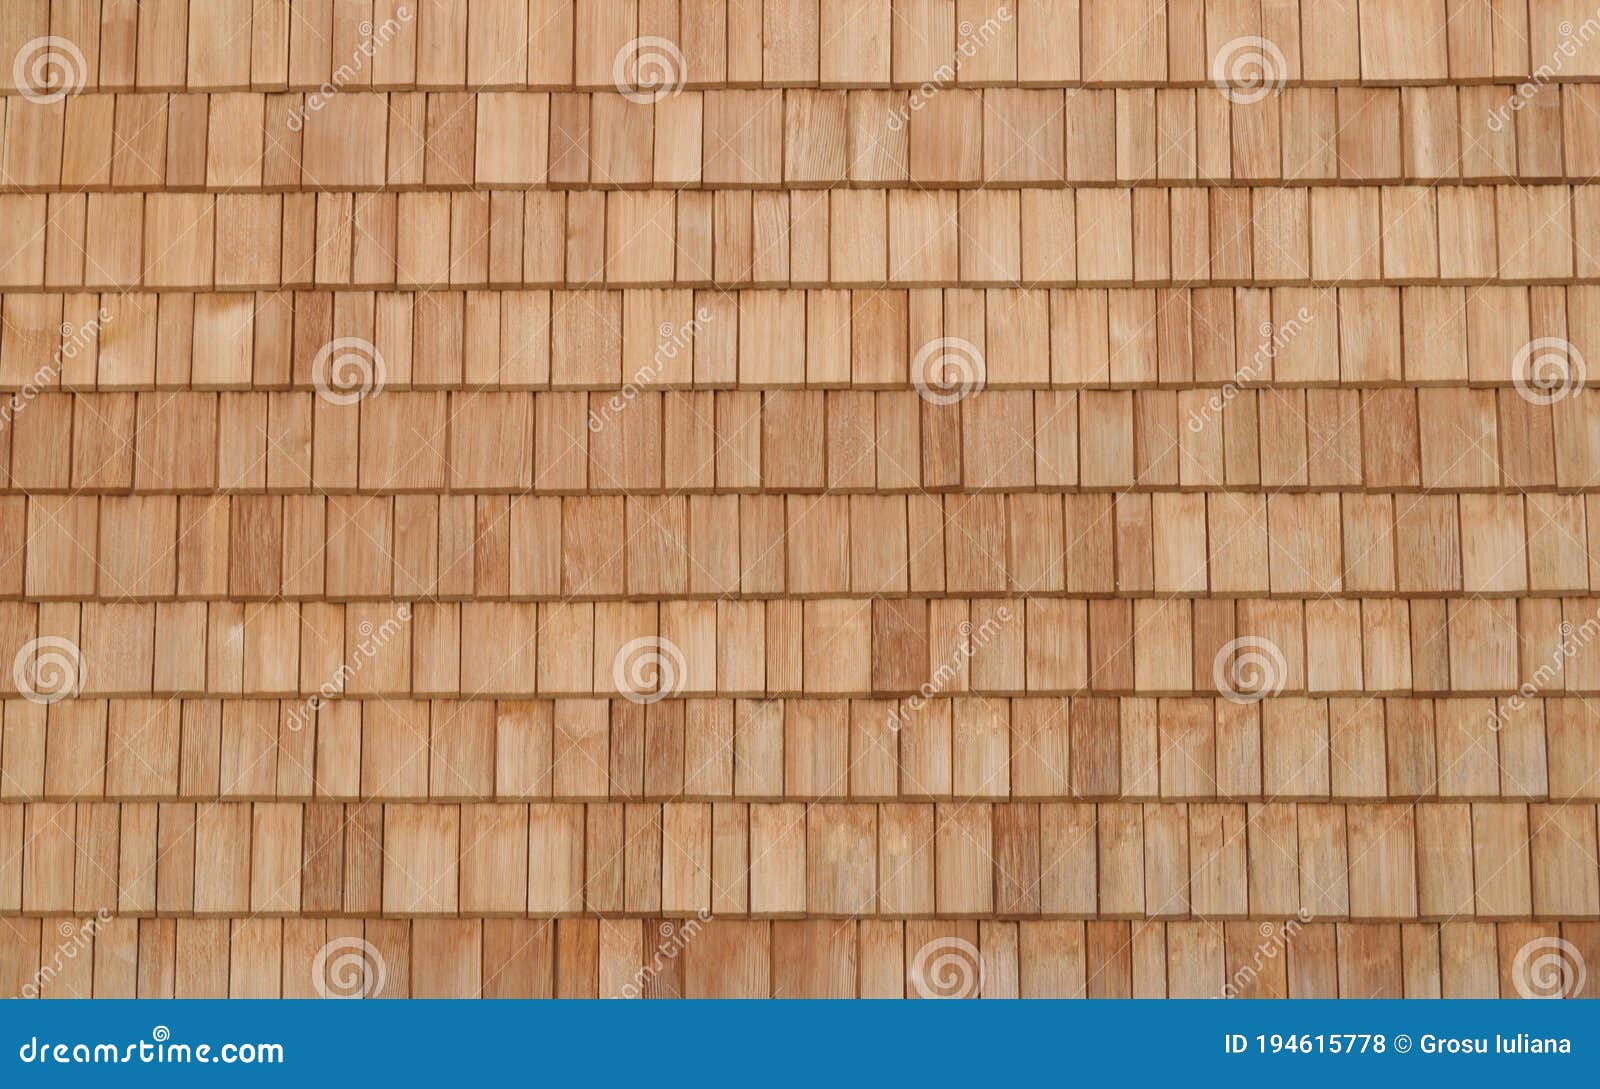 abstract wood texture close up. cedar shingles for background with white space